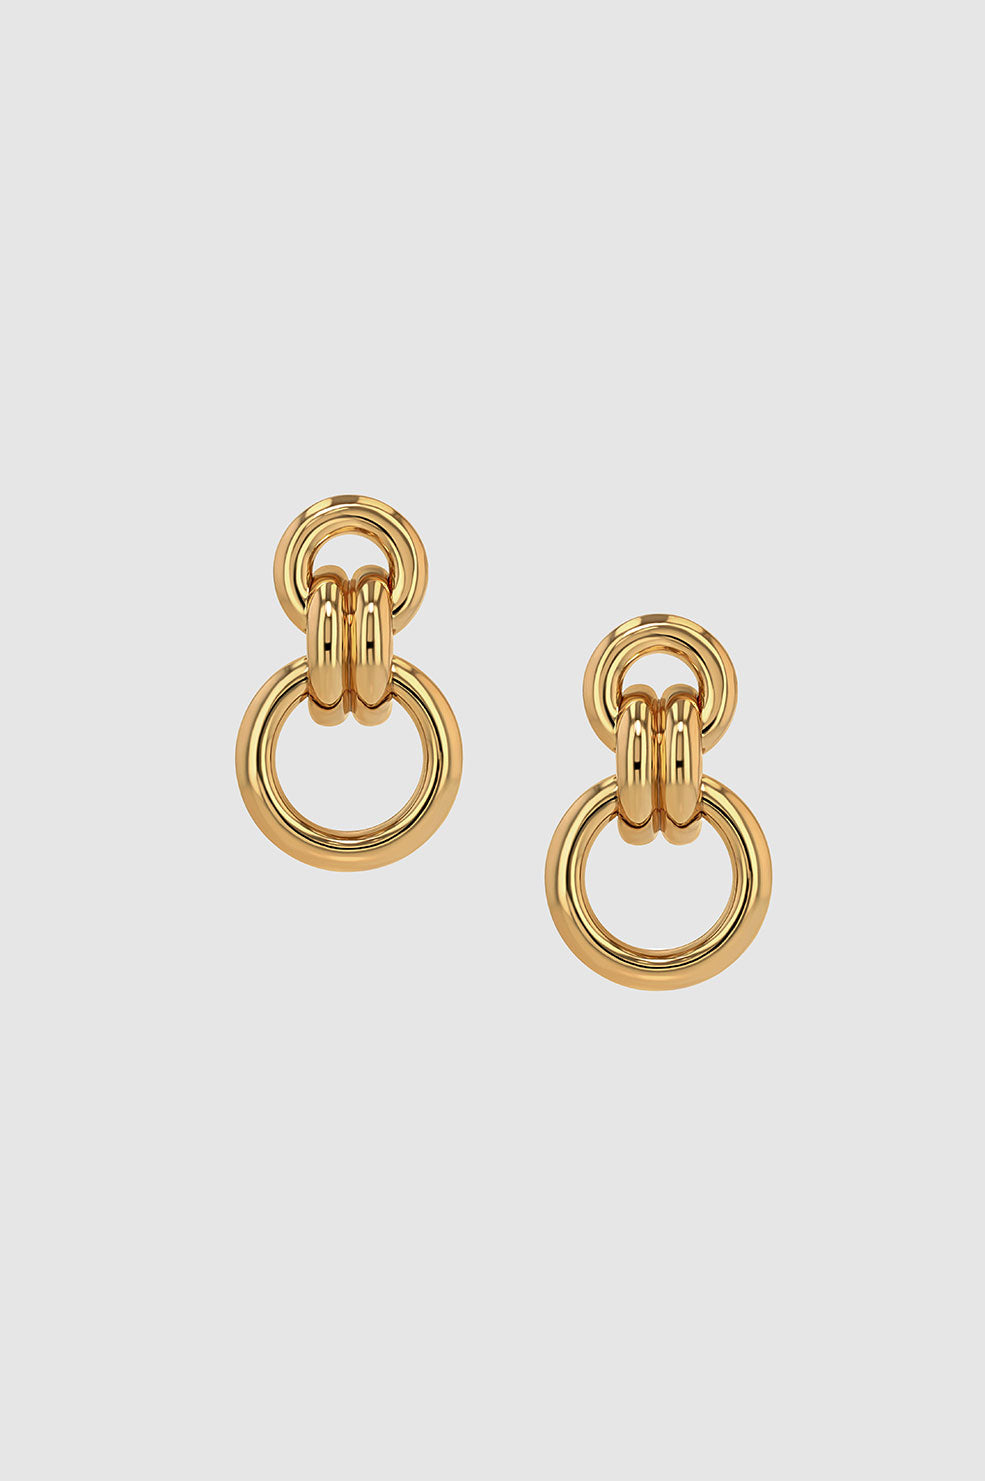 Round Link Drop Earrings - Gold